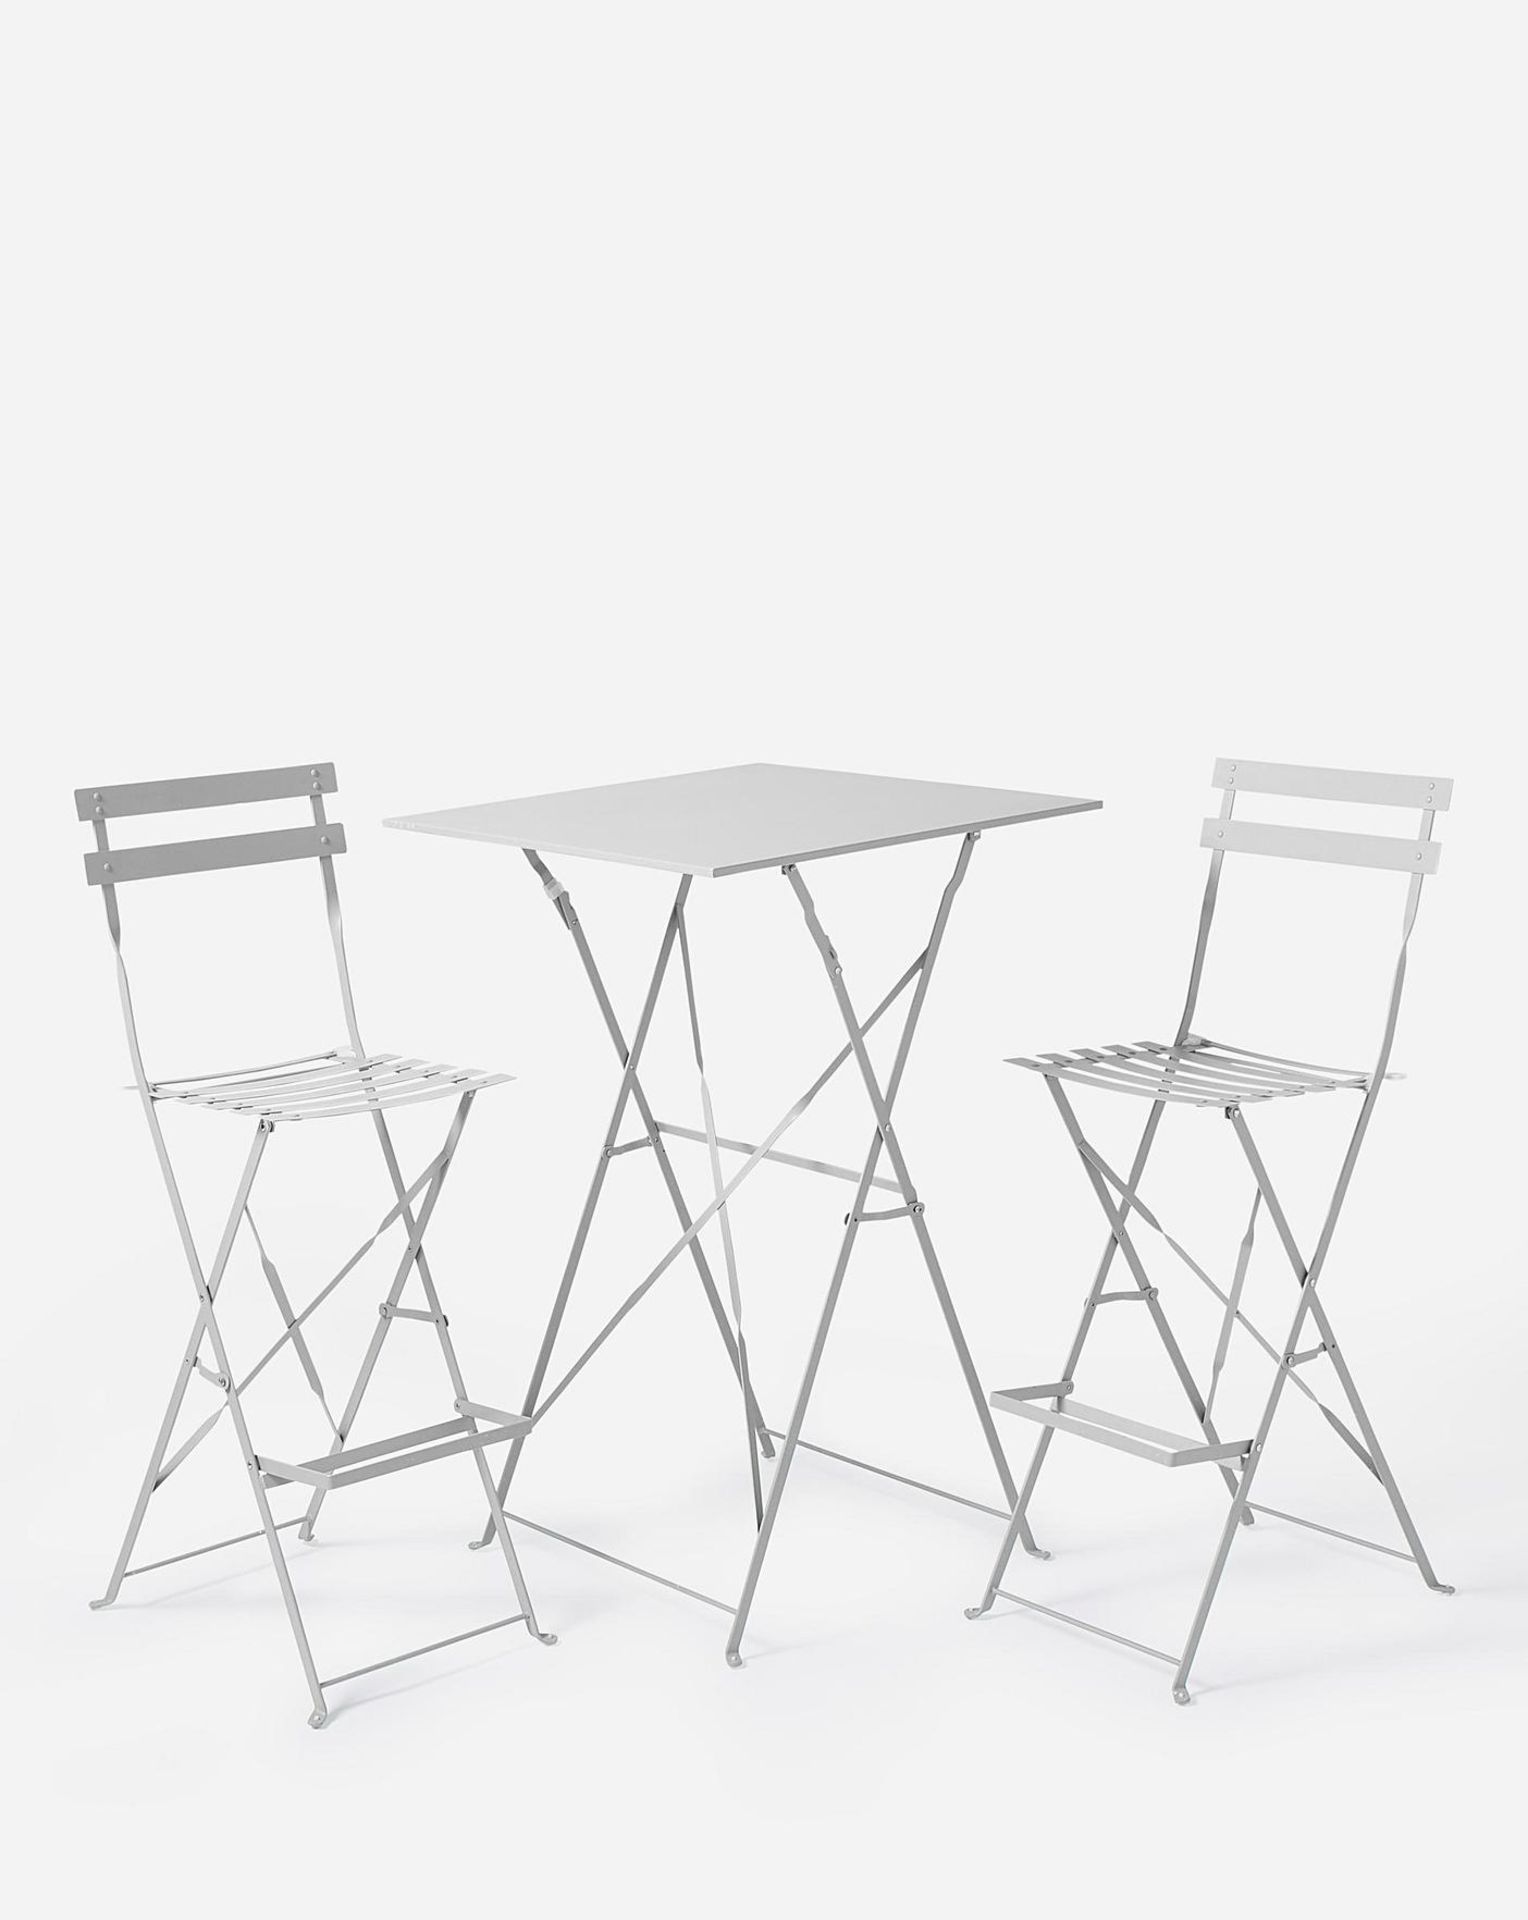 BRAND NEW Palma Bistro Bar Set GREY. RRP £159 EACH. Liven up your garden or balcony with this pretty - Image 2 of 2